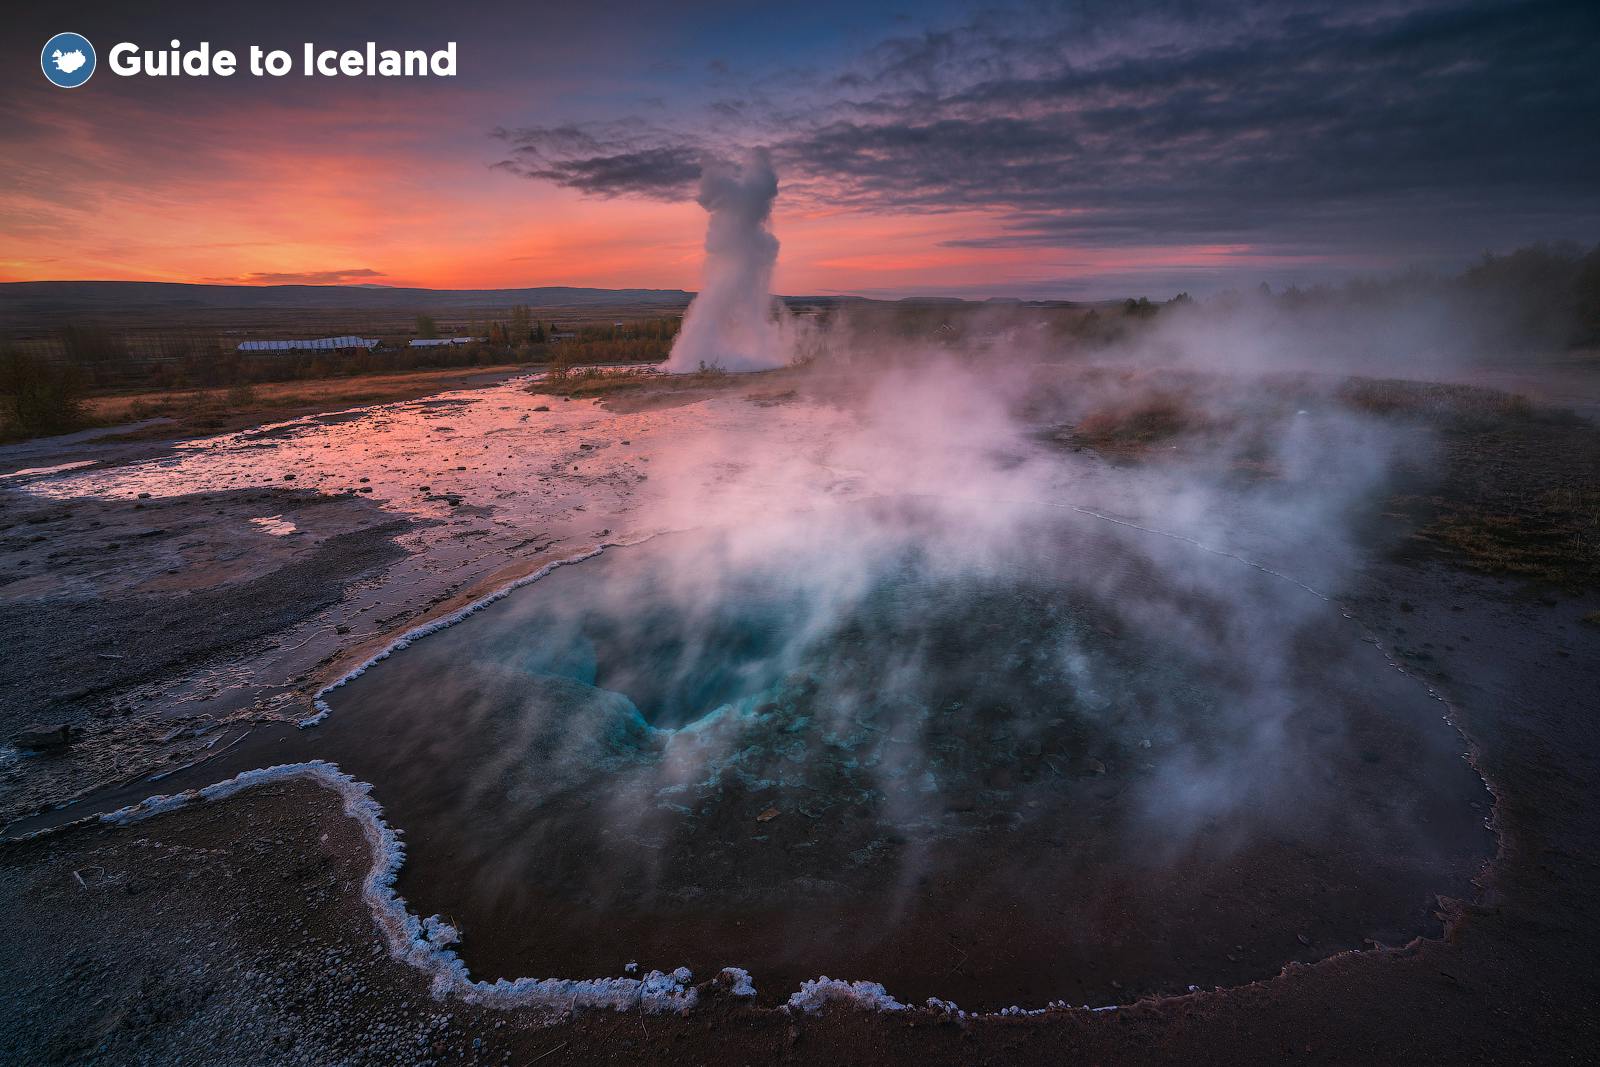 The rising steam from the Geysir Geothermal Area which is part of the famous Golden Circle Tourist Route in South West Iceland.